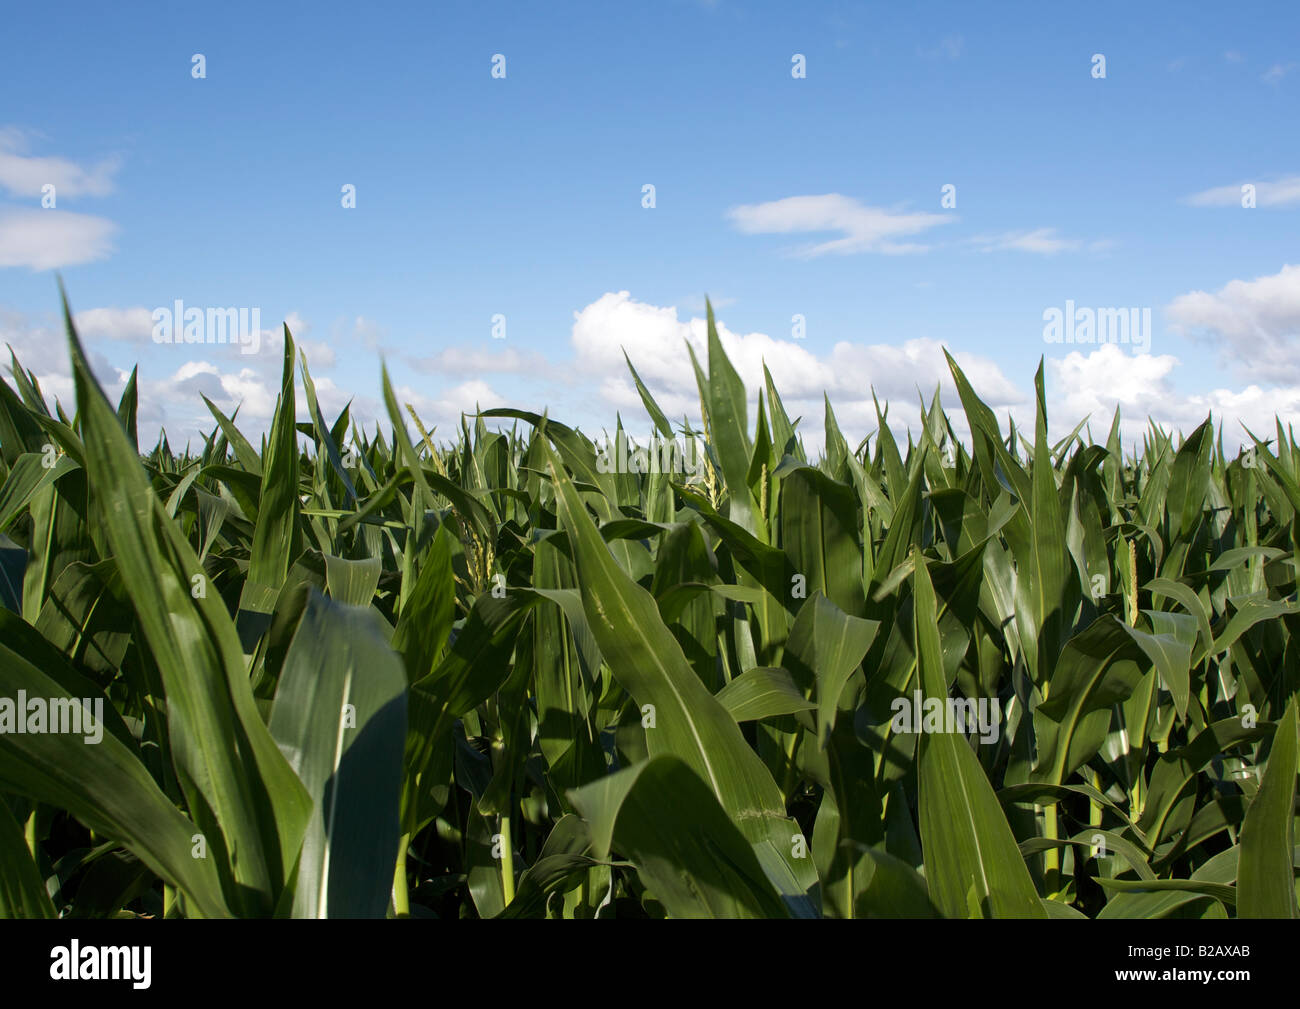 Field of young maize plants against blue sky Stock Photo